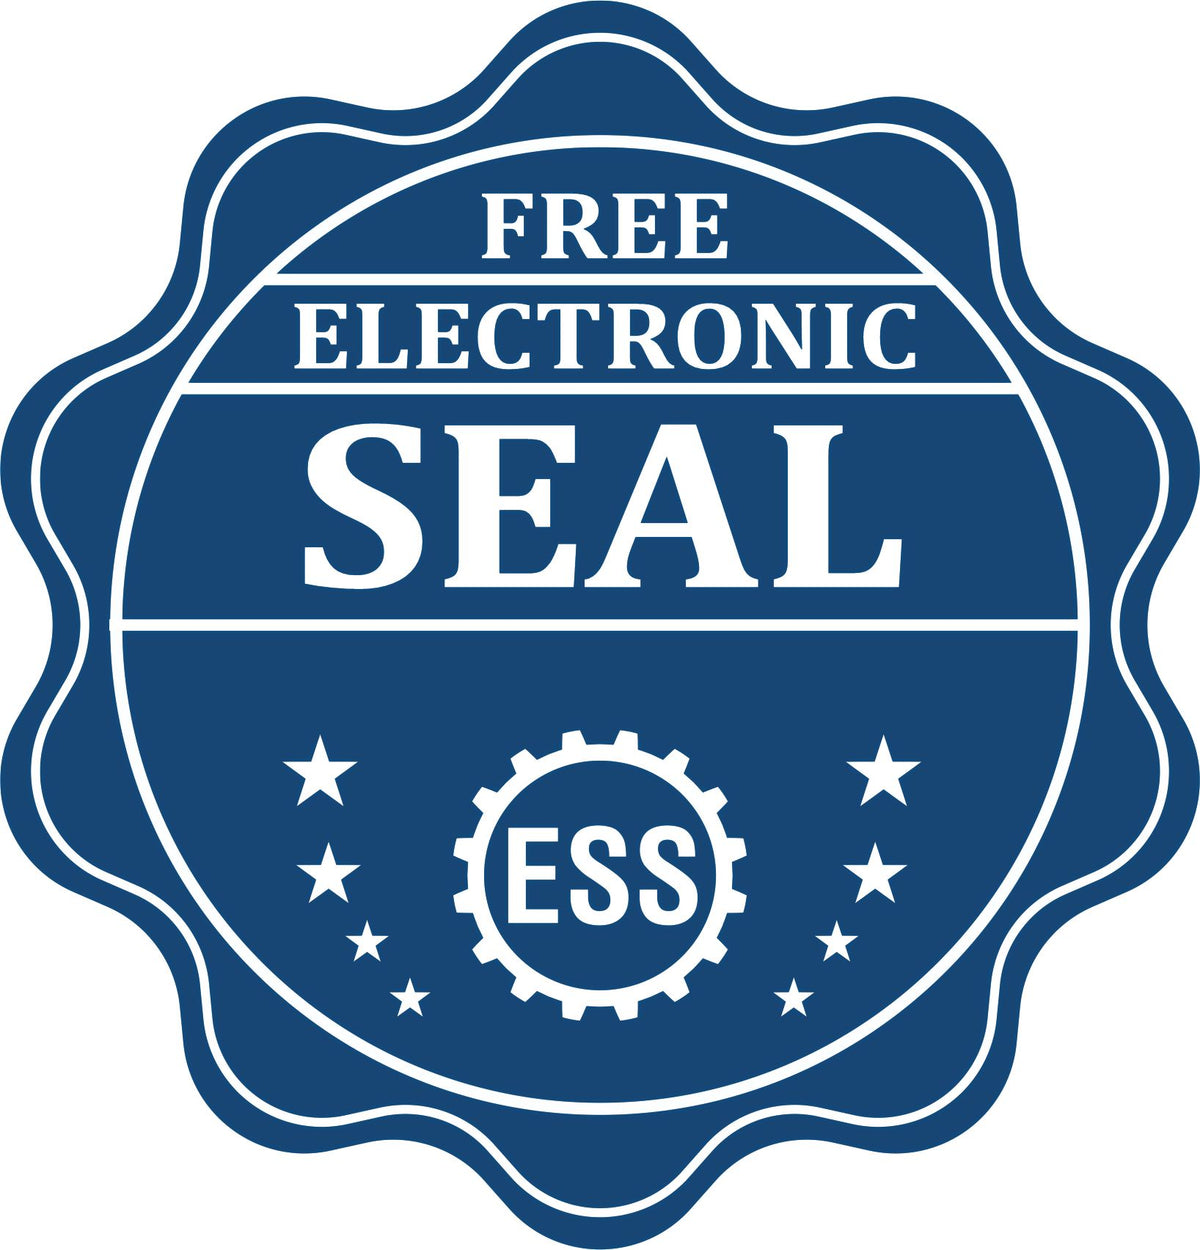 A badge showing a free electronic seal for the Soft Hawaii Professional Engineer Seal with stars and the ESS gear on the emblem.